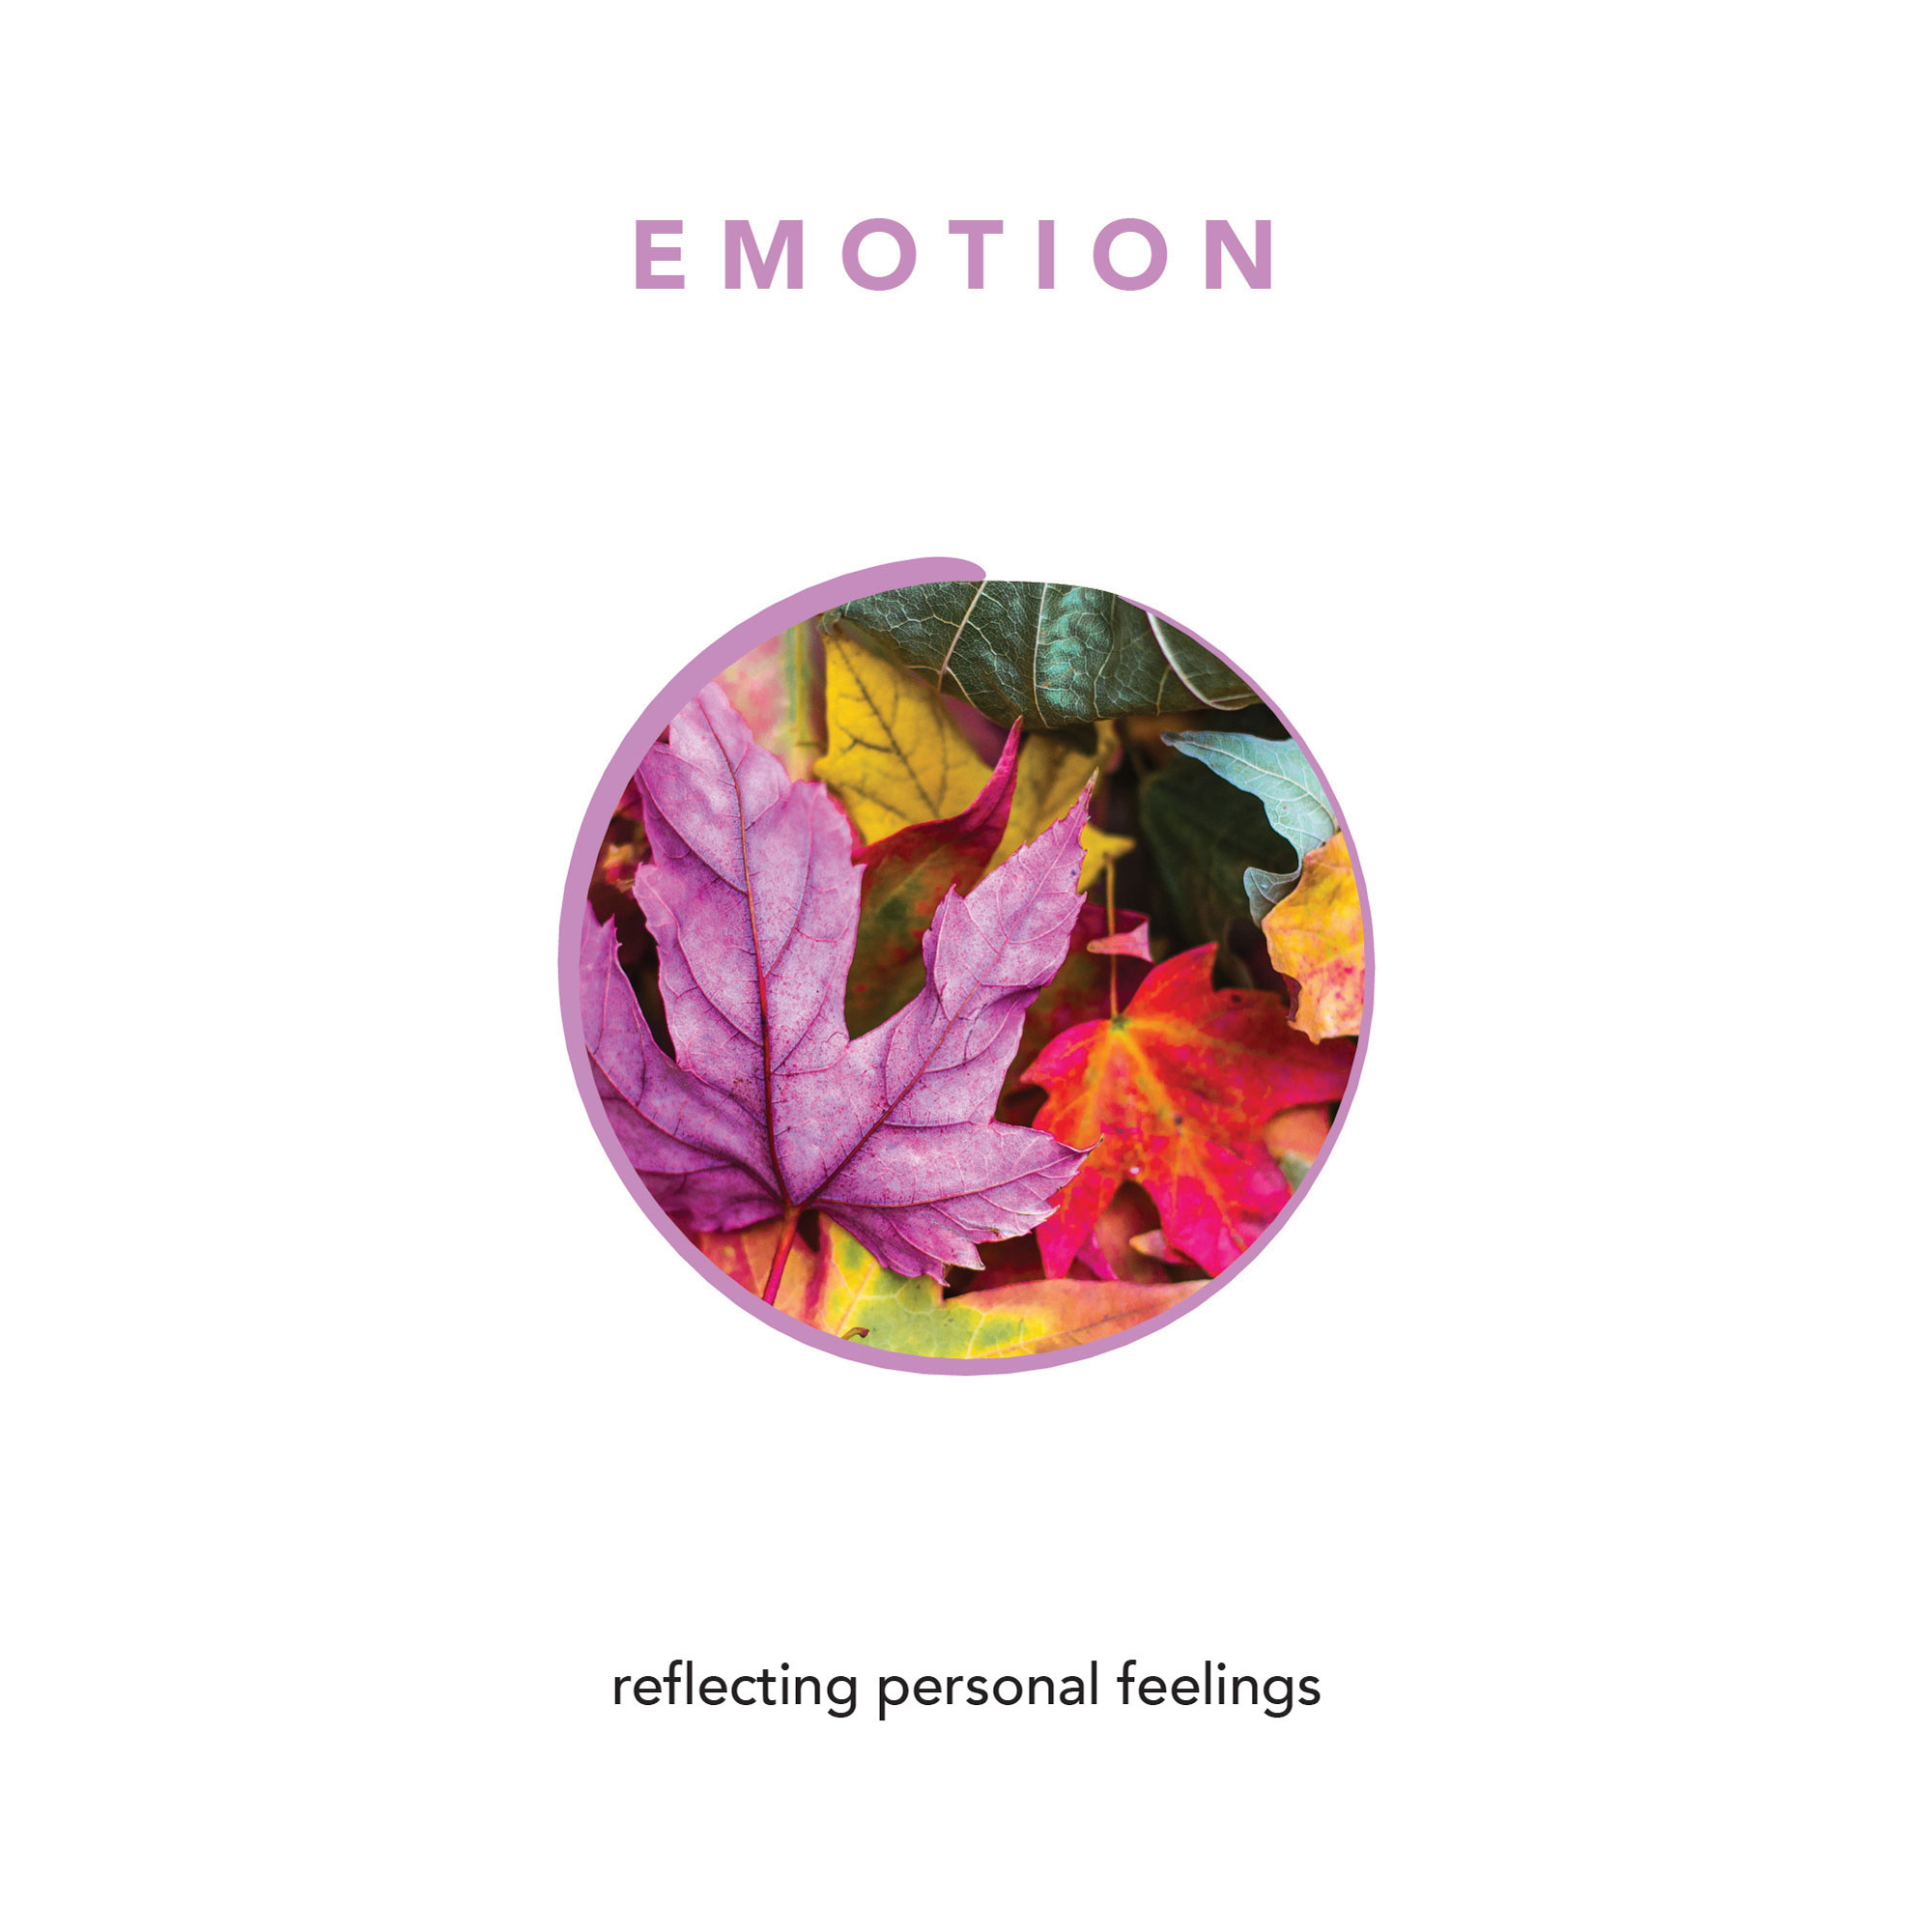 😱 EMOTION - channeling emotional energy into creative expression